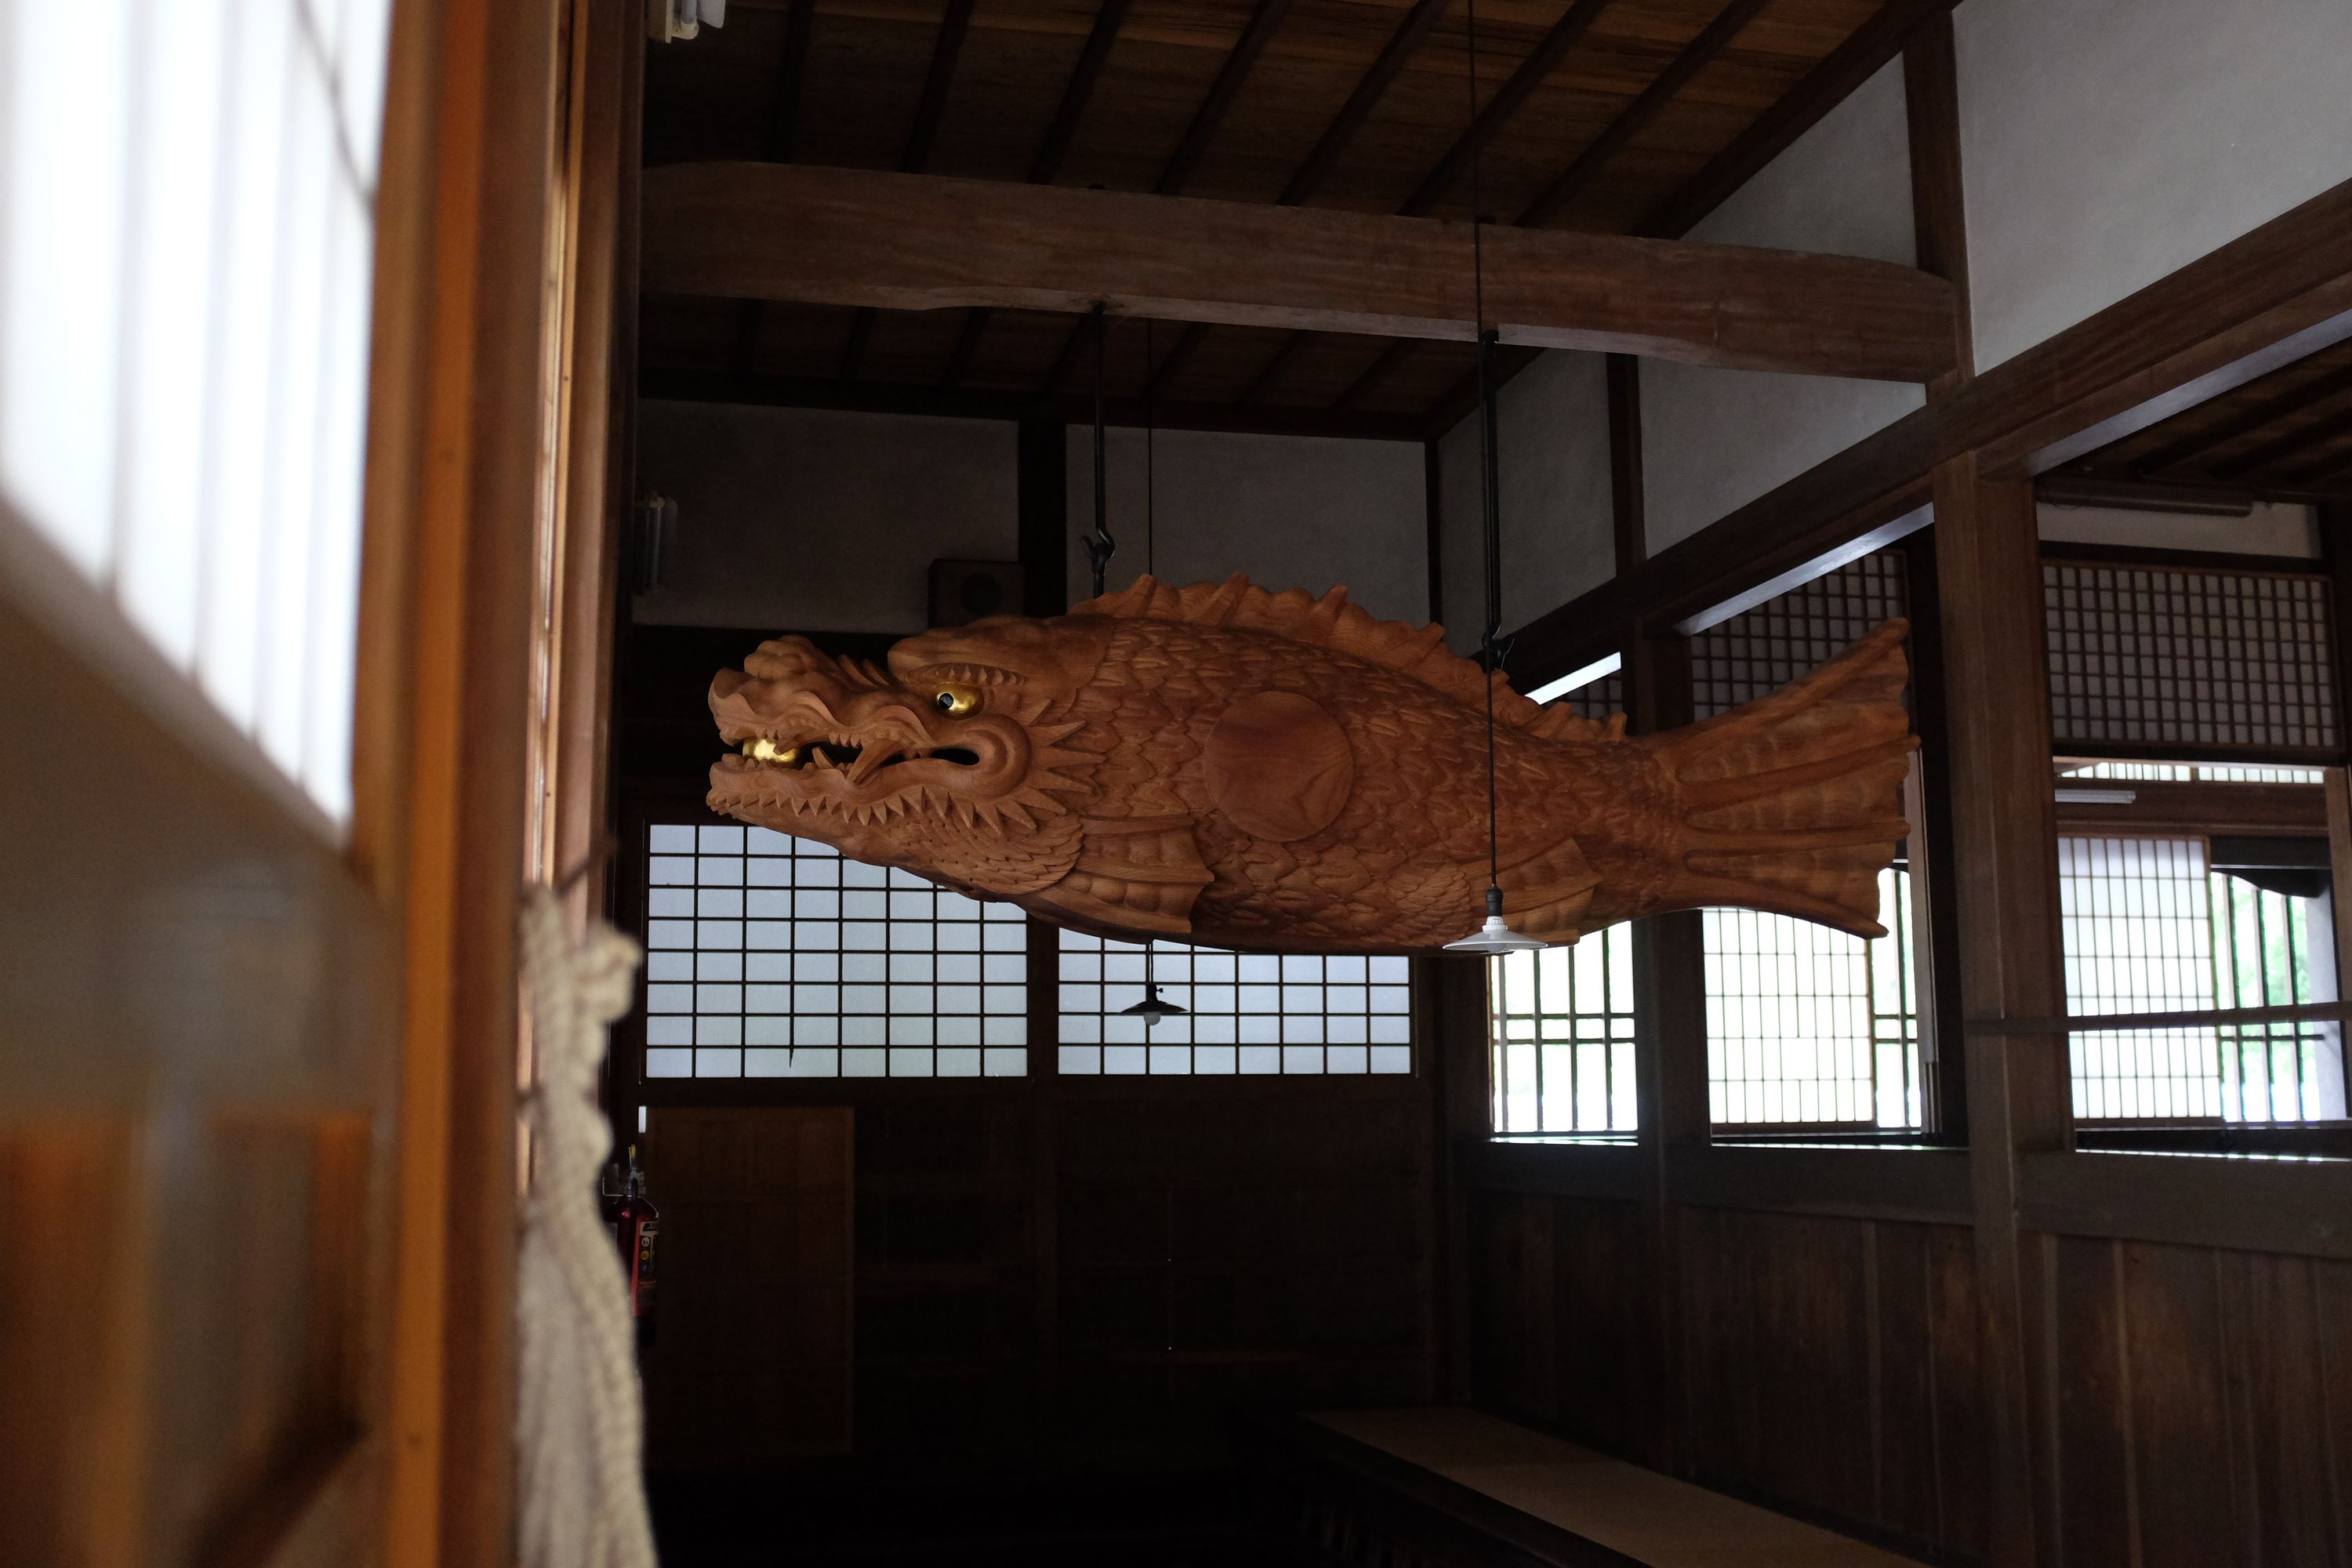 A menacing looking carved wooden fish-monster hangs from the ceiling of a Japanese temple.